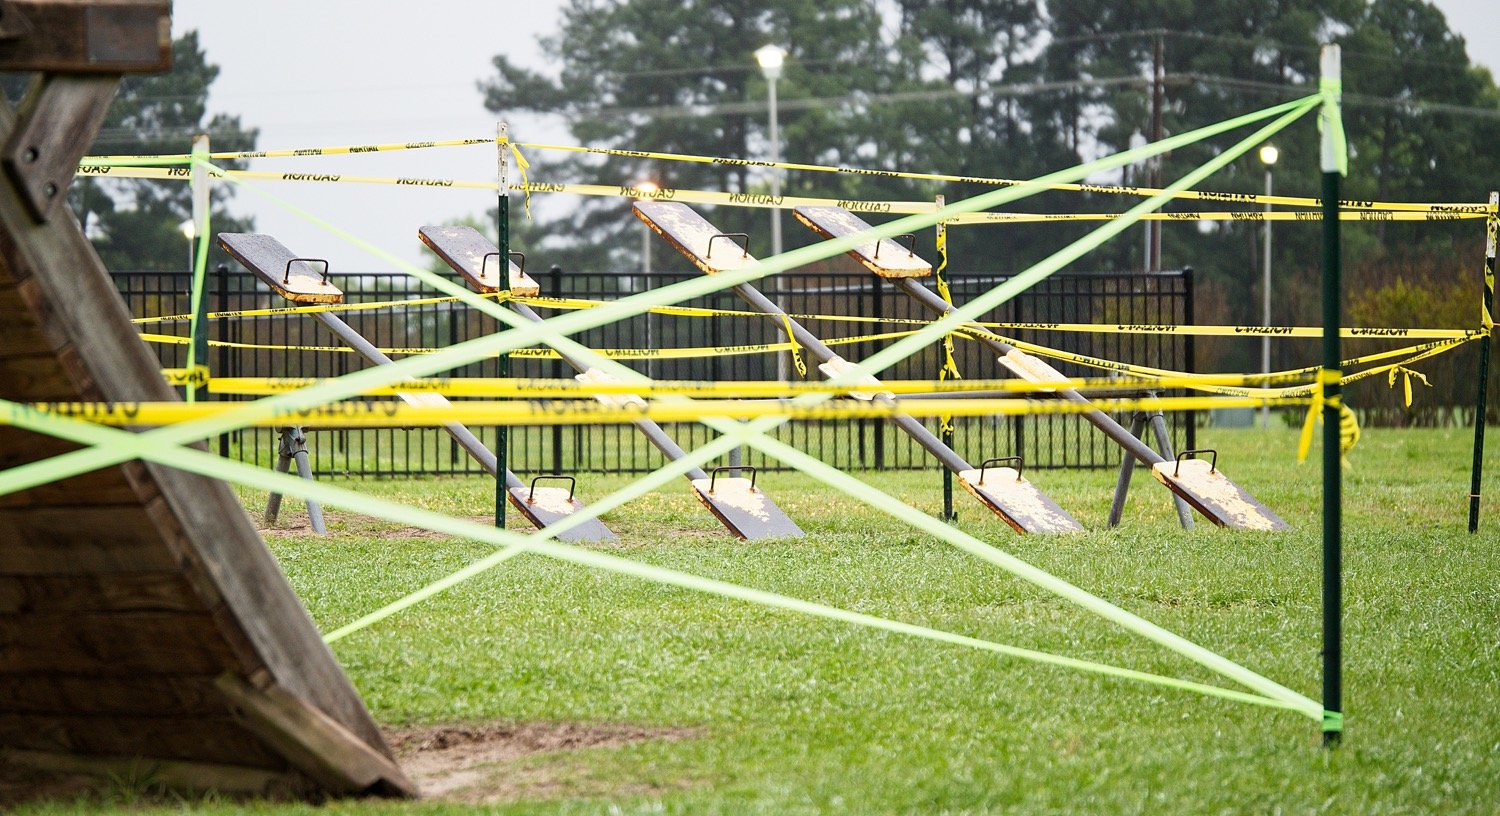 In early April, playground equipment at the Mineola Civic Center was taped off, since early preventative measures focused on coronavirus spread via contact as much as airborne.